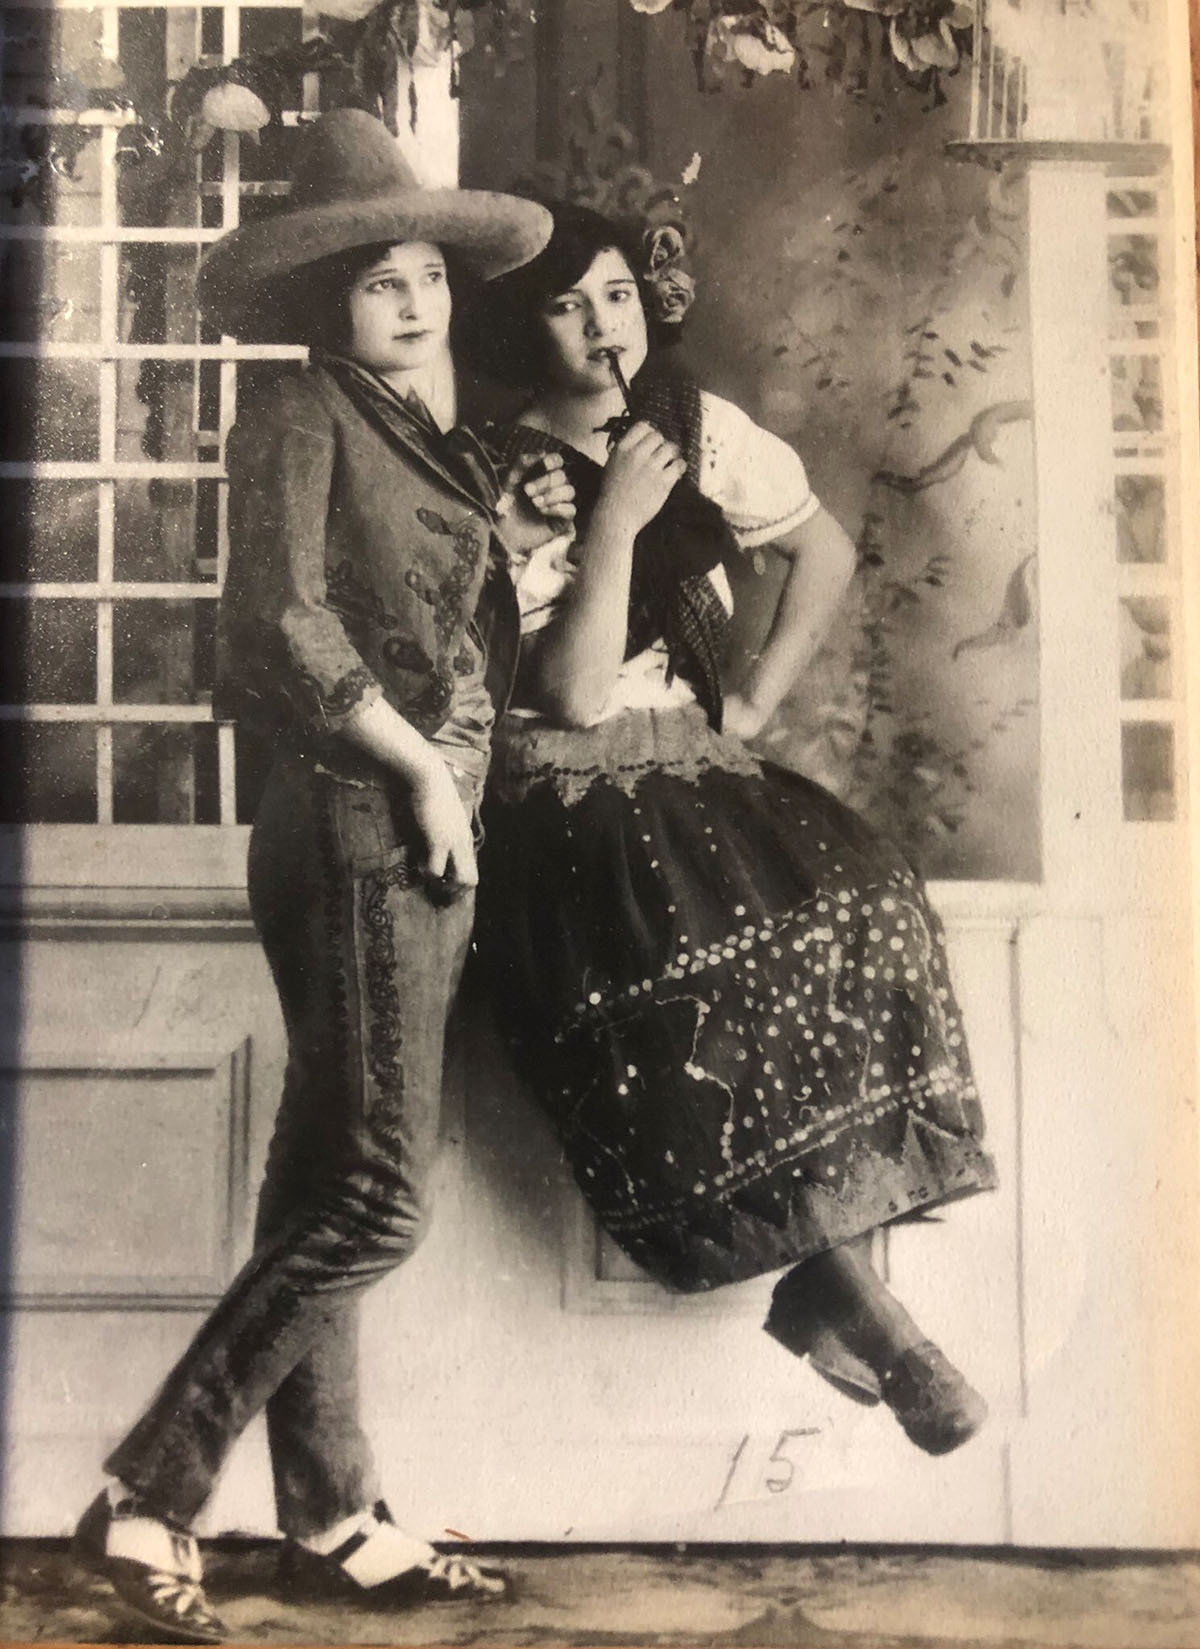 Two women in an old fashioned photograph sit on a wall